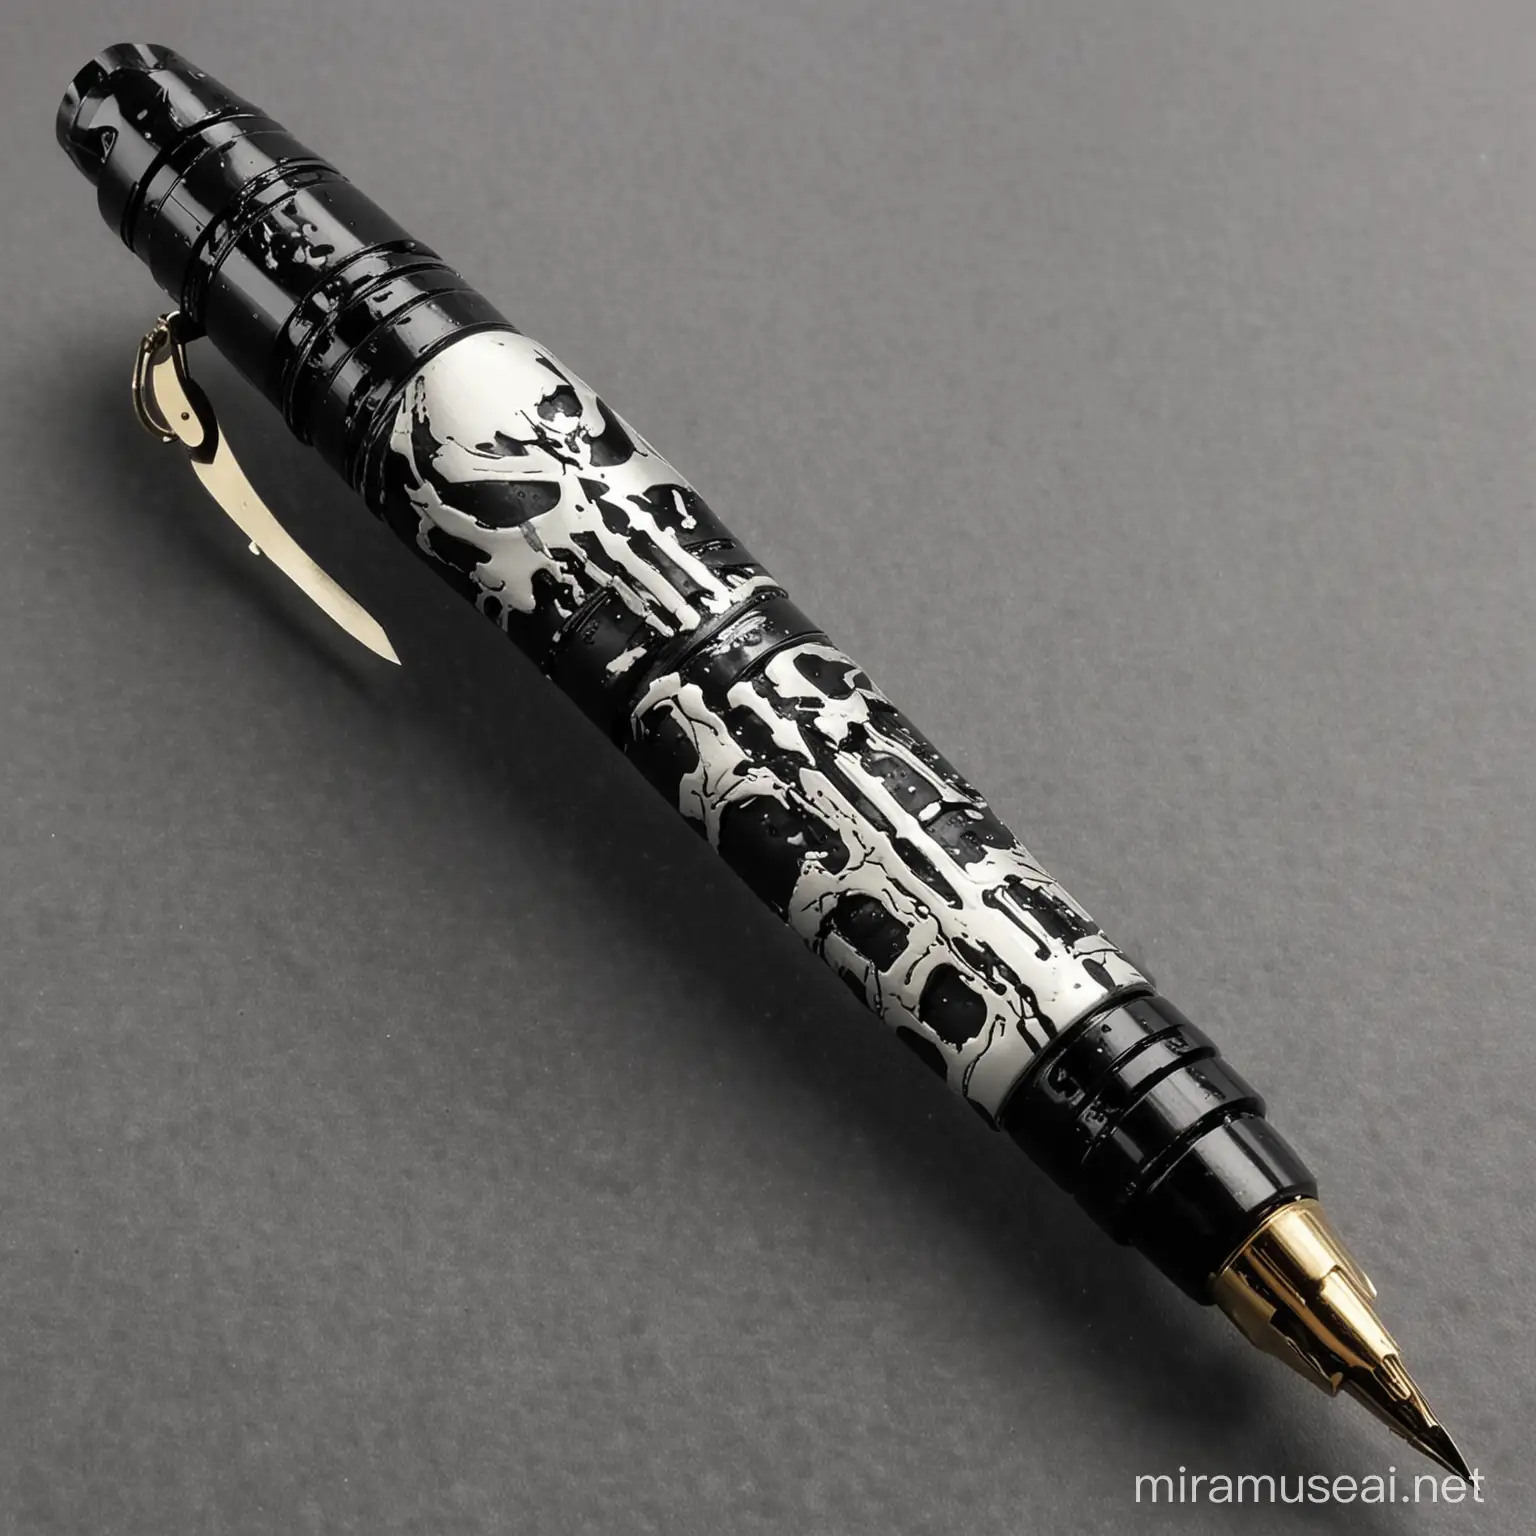 The Punisher Style Fountain Pen Artwork Inked Vengeance in Monochrome